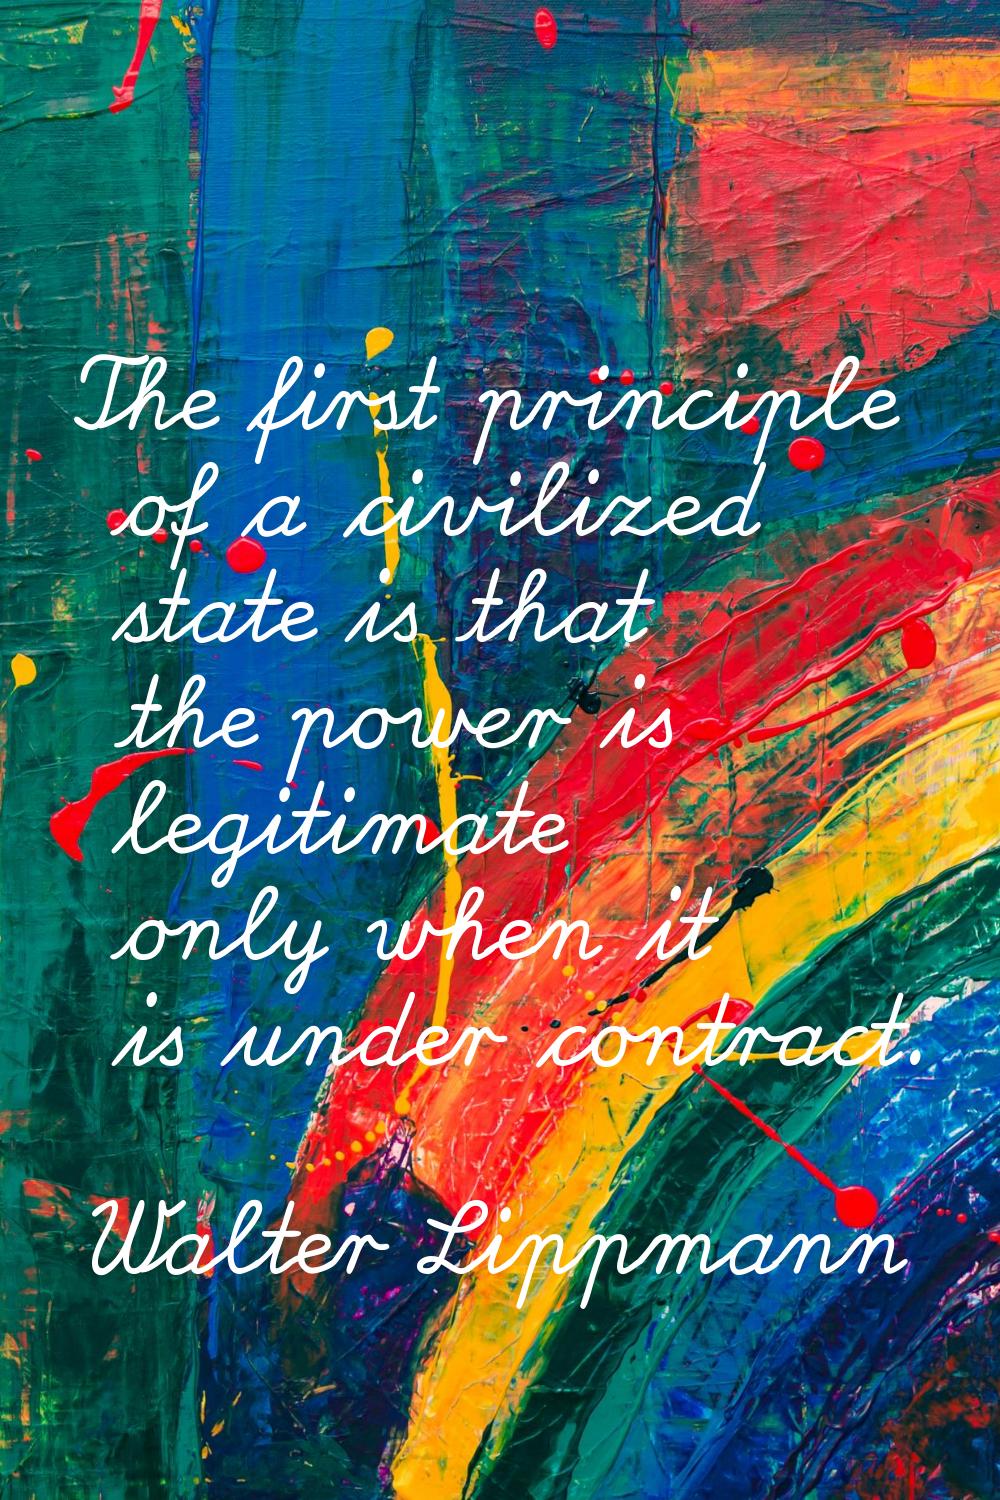 The first principle of a civilized state is that the power is legitimate only when it is under cont